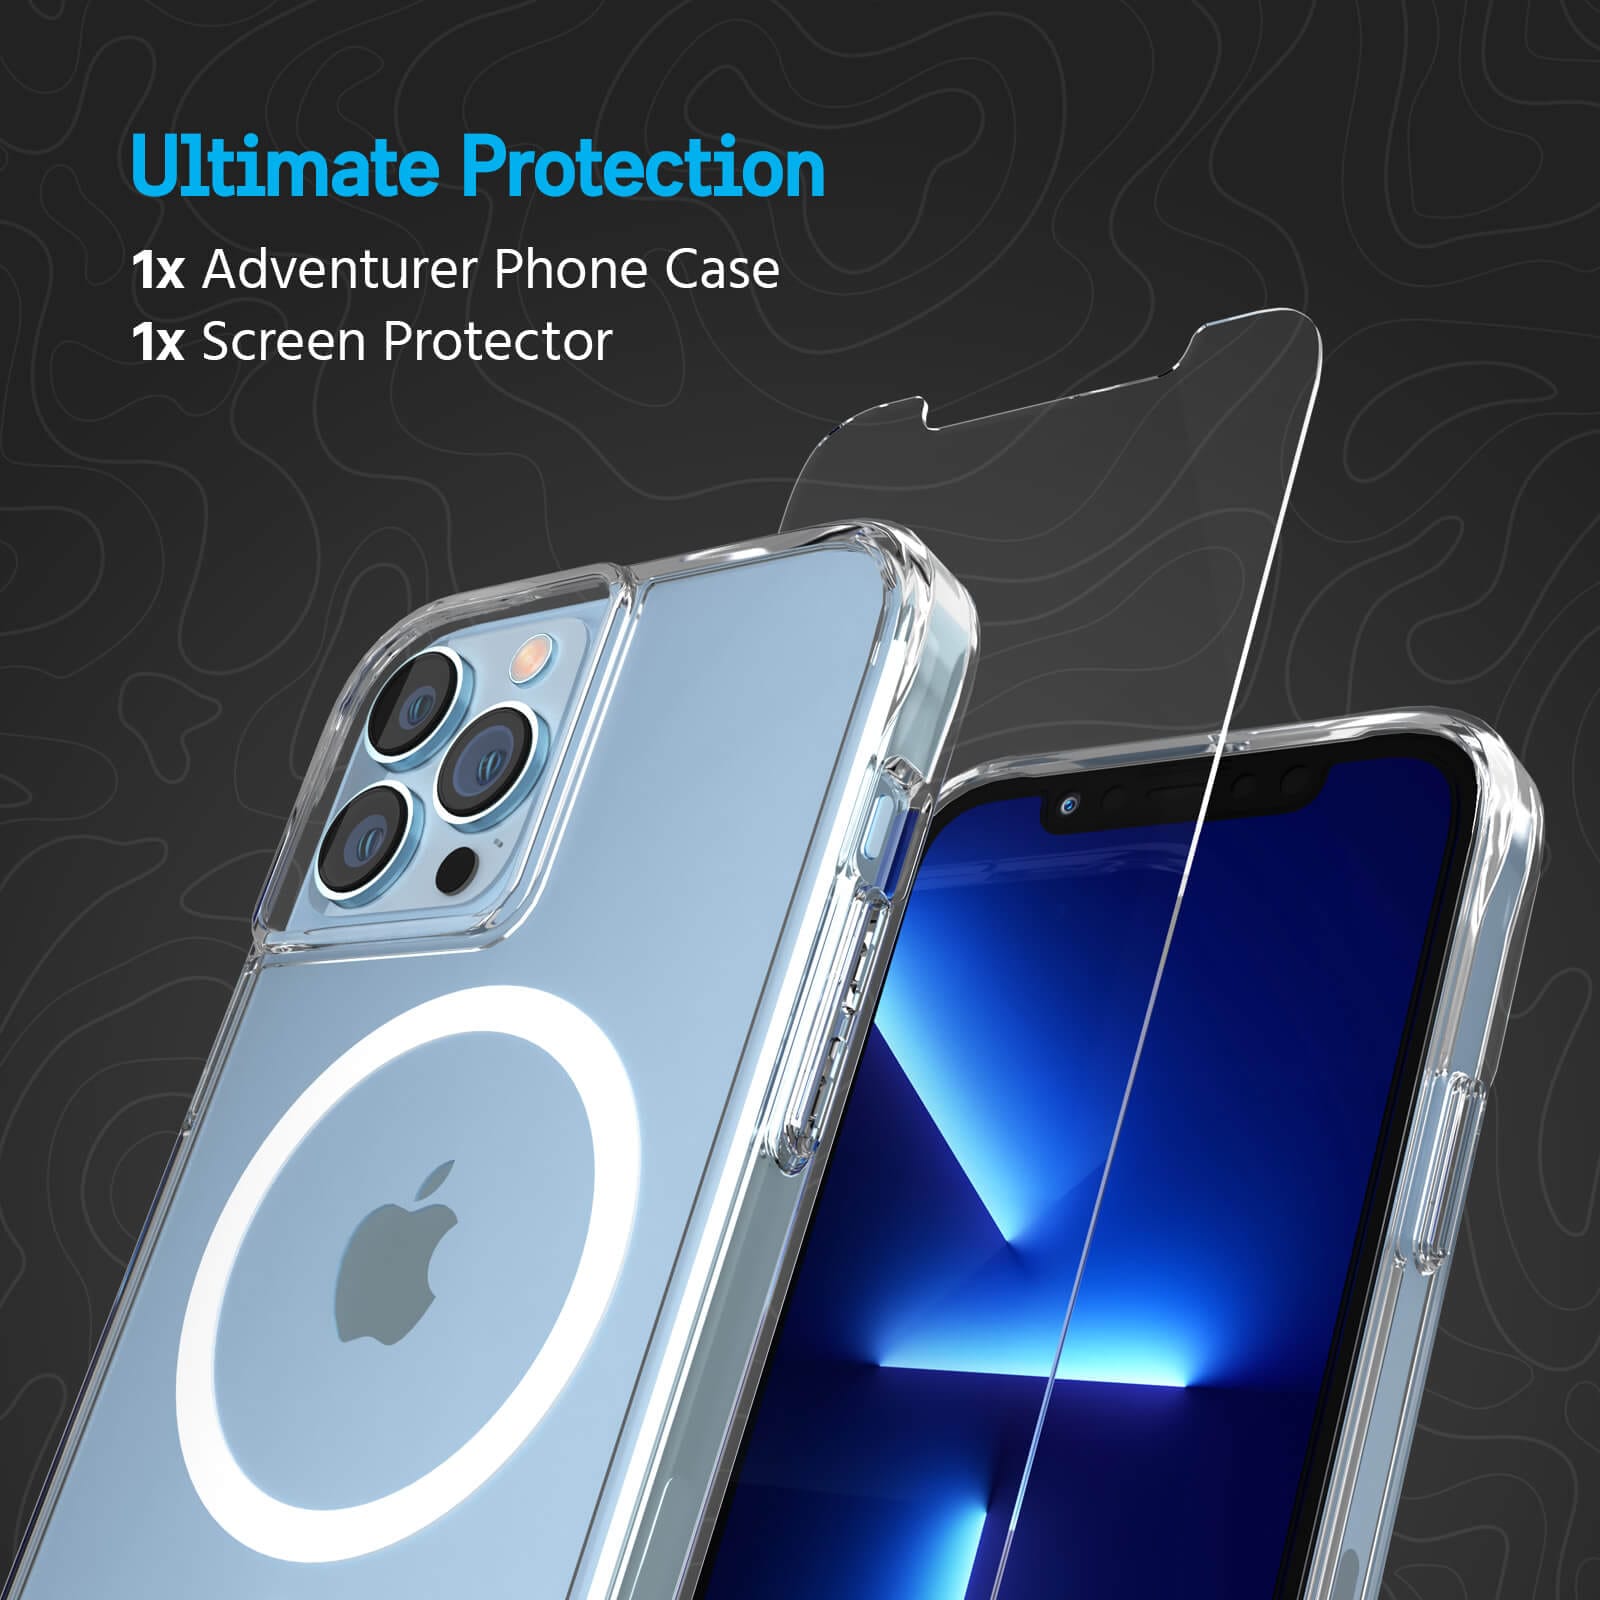 ULTIMATE PROTECTION. 1X ADVENTURER CASE, 1X SCREEN PROTECTOR COLOR::CLEAR